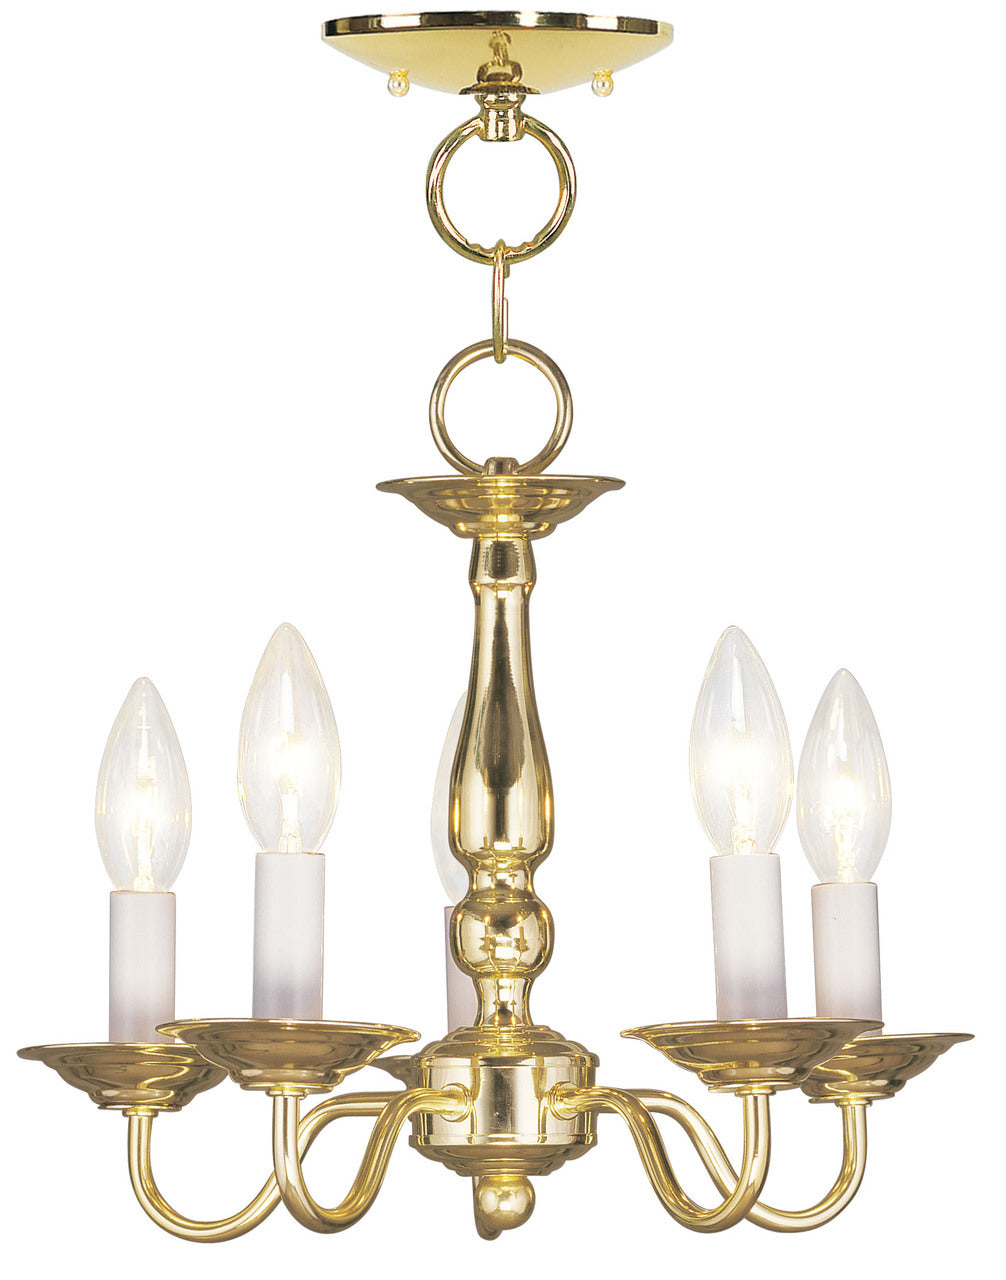 LIVEX Lighting 5011-02 Williamsburgh Convertible Chain Hung/Flushmount in Polished Brass (5 Light)